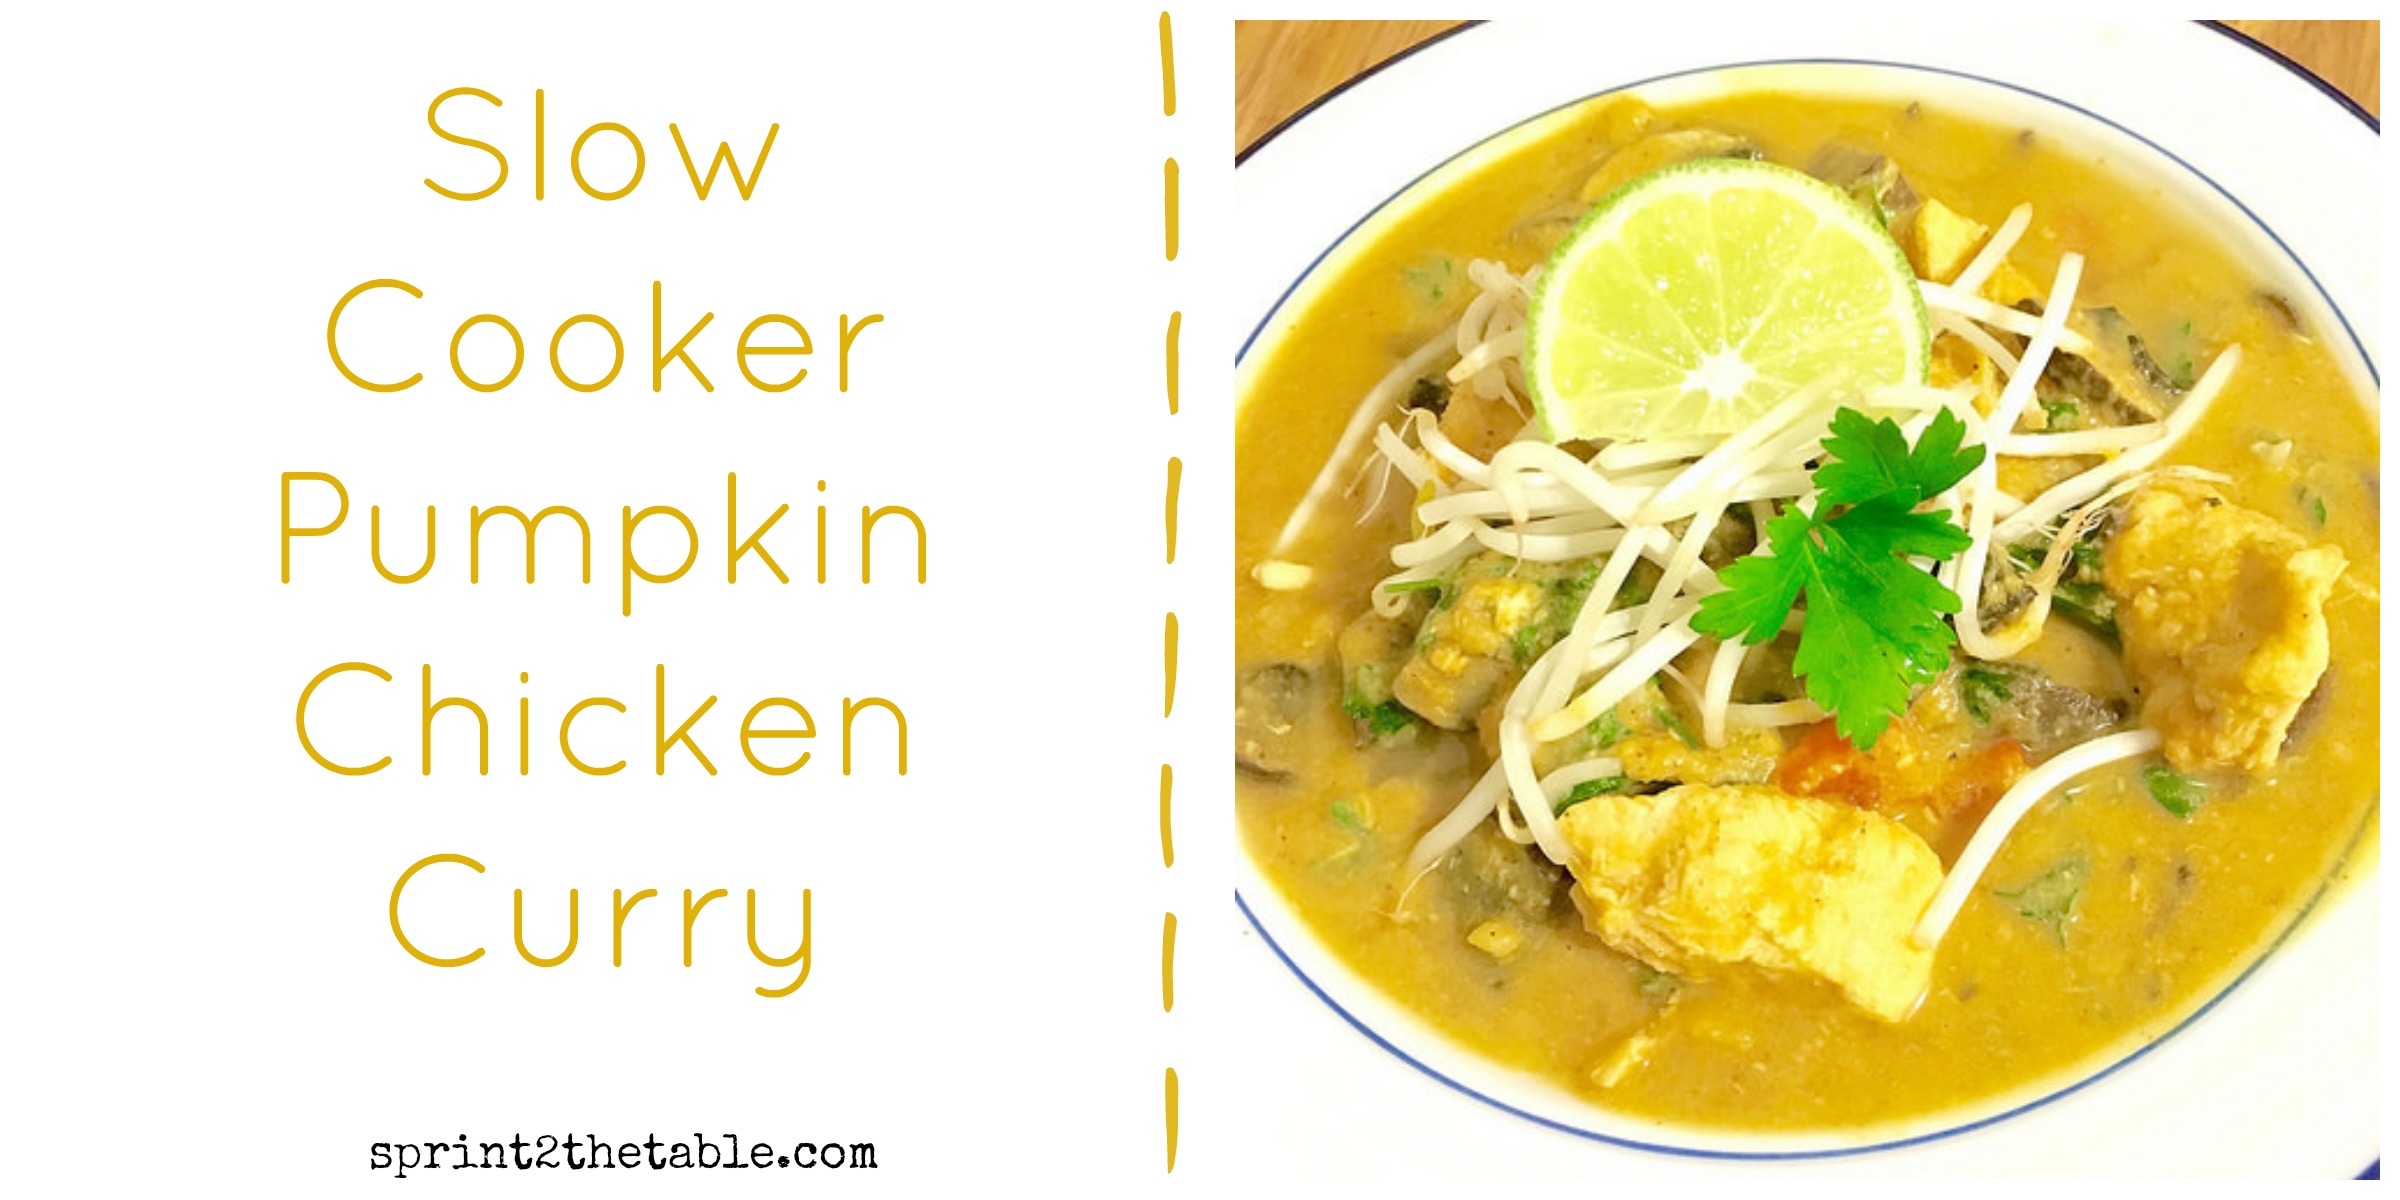 Slow Cooker Pumpkin Chicken Curry - it may not be traditional, but adding pumpkin to curry broth makes it crazy silky. AND you can do this in the slow cooker, making it so much easier.